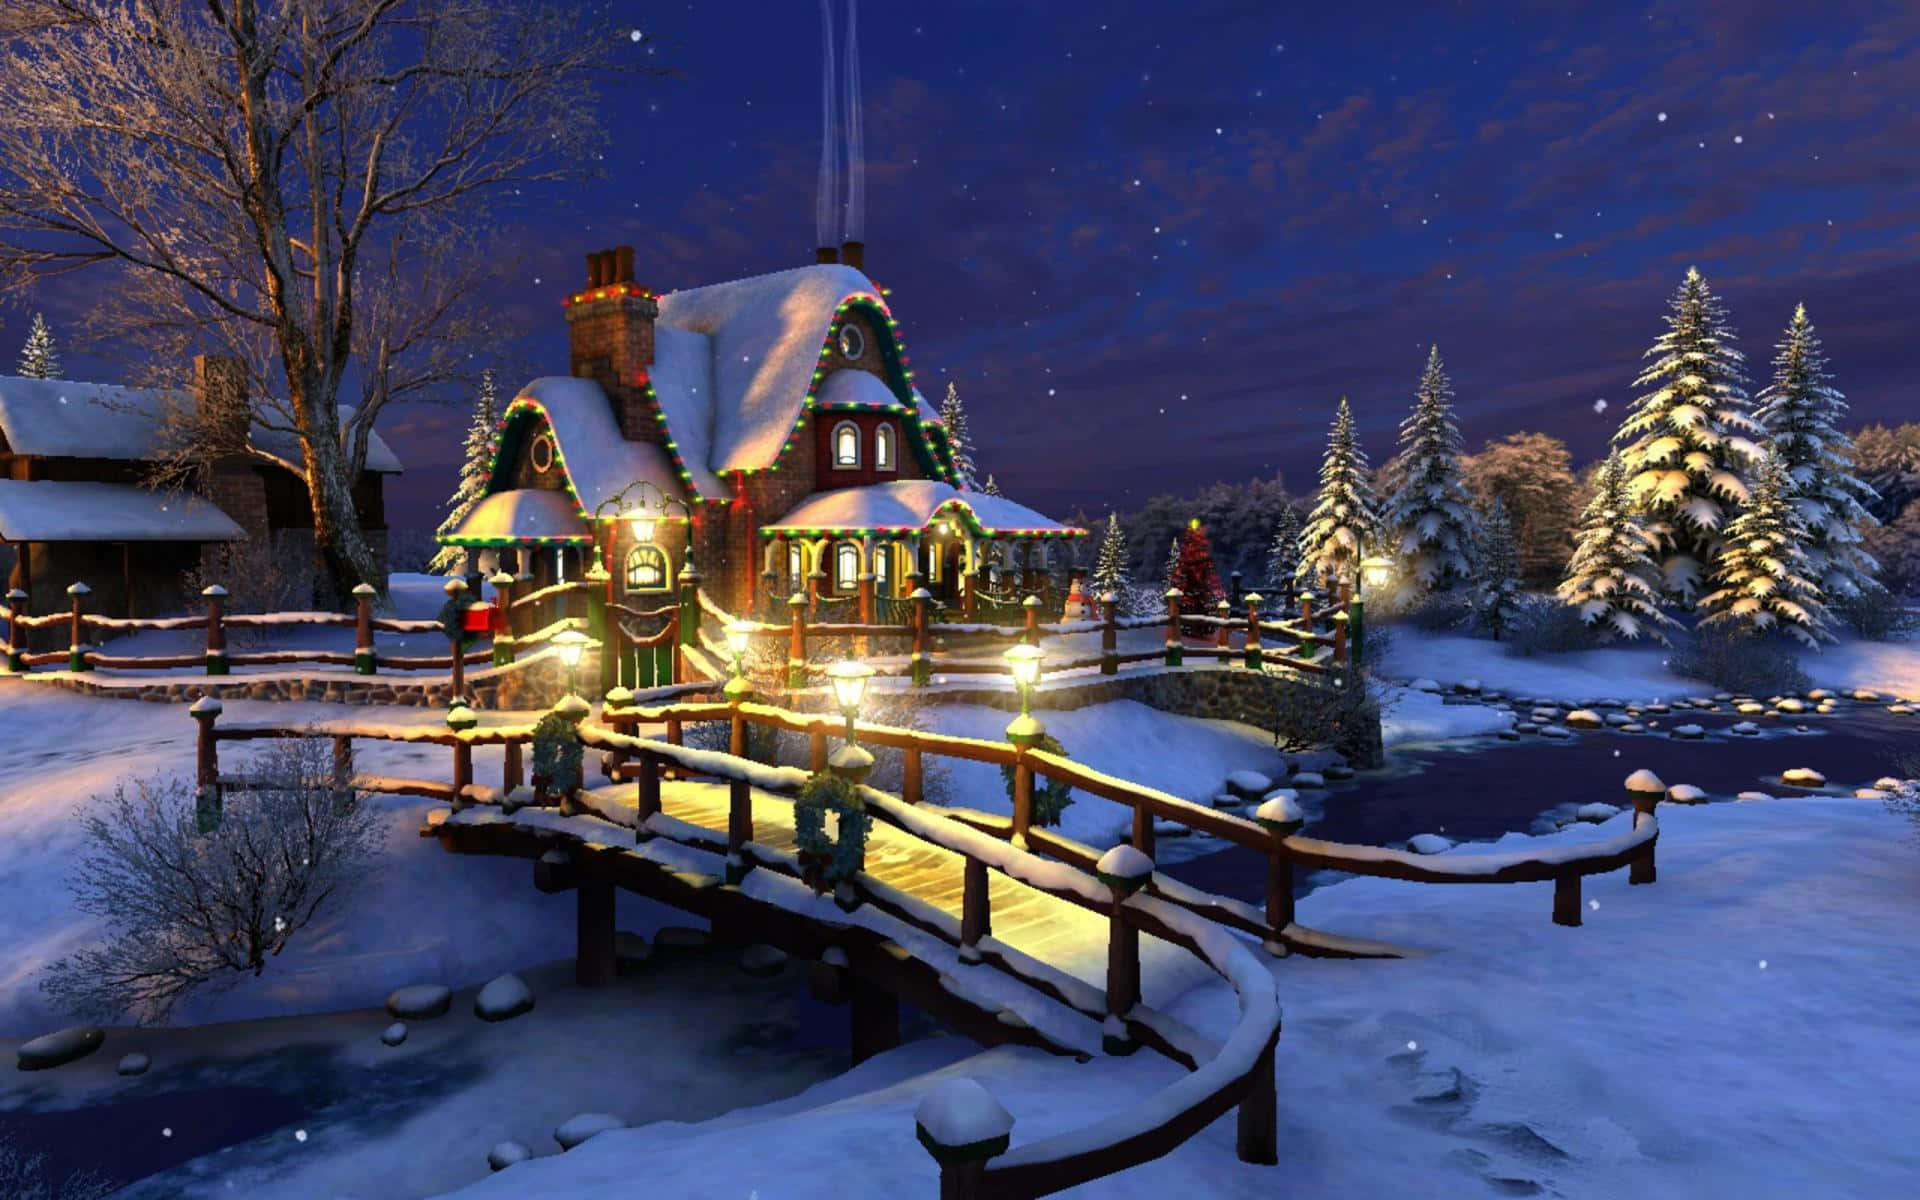 Celebrate The Coming Of The Season With A Beautiful Landscape!